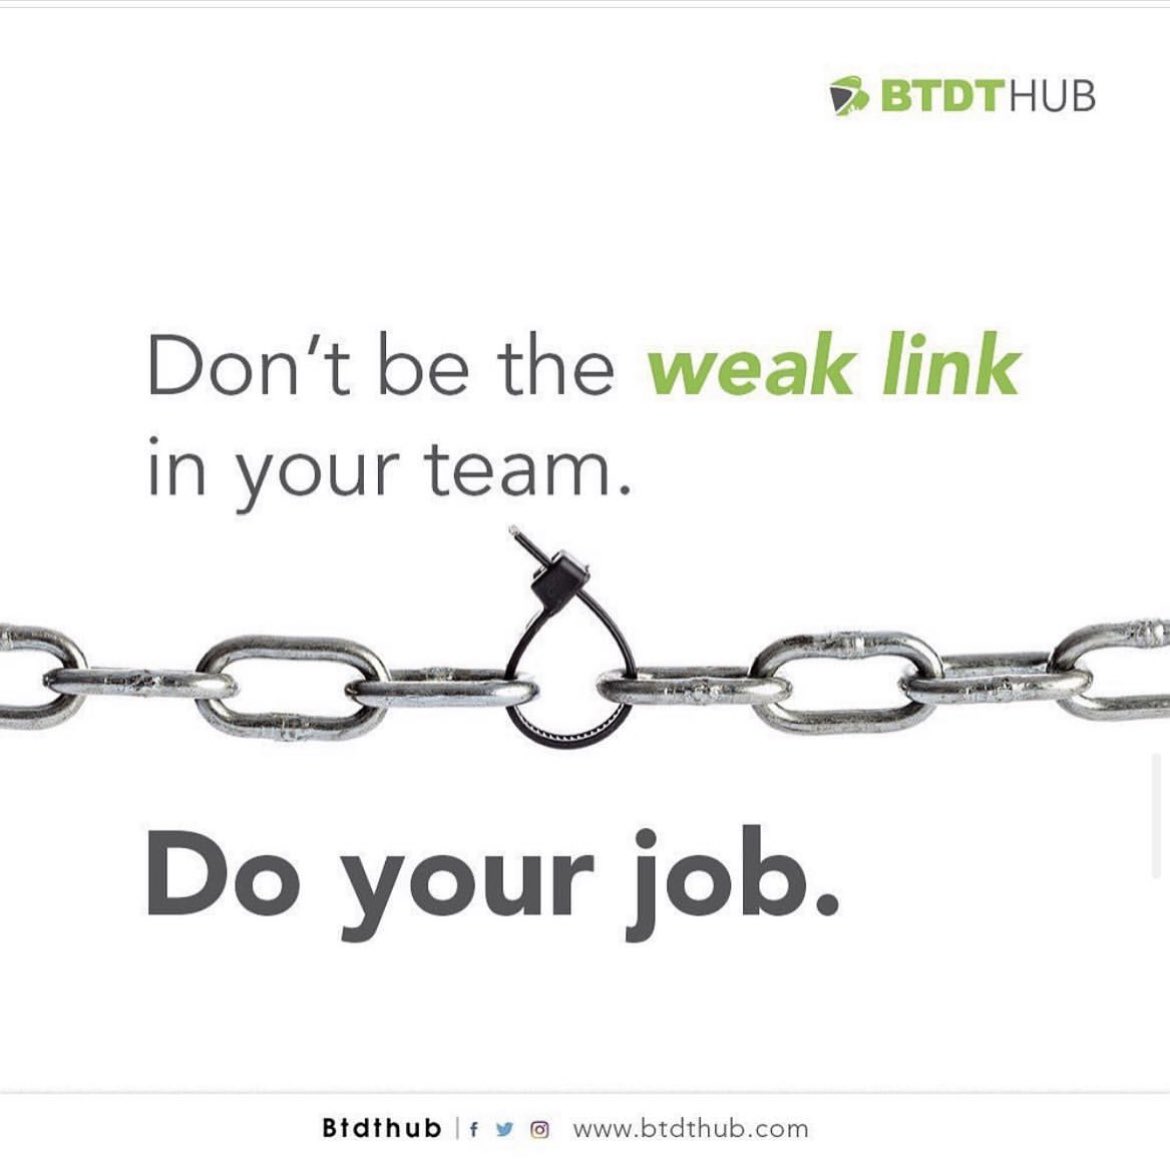 Do not ruin your team with subpar output and attitude. A weak link weakens the chain. Strive for excellence. Be your own Cheerleader 🎉. #MondayMotivation #BTDTHub